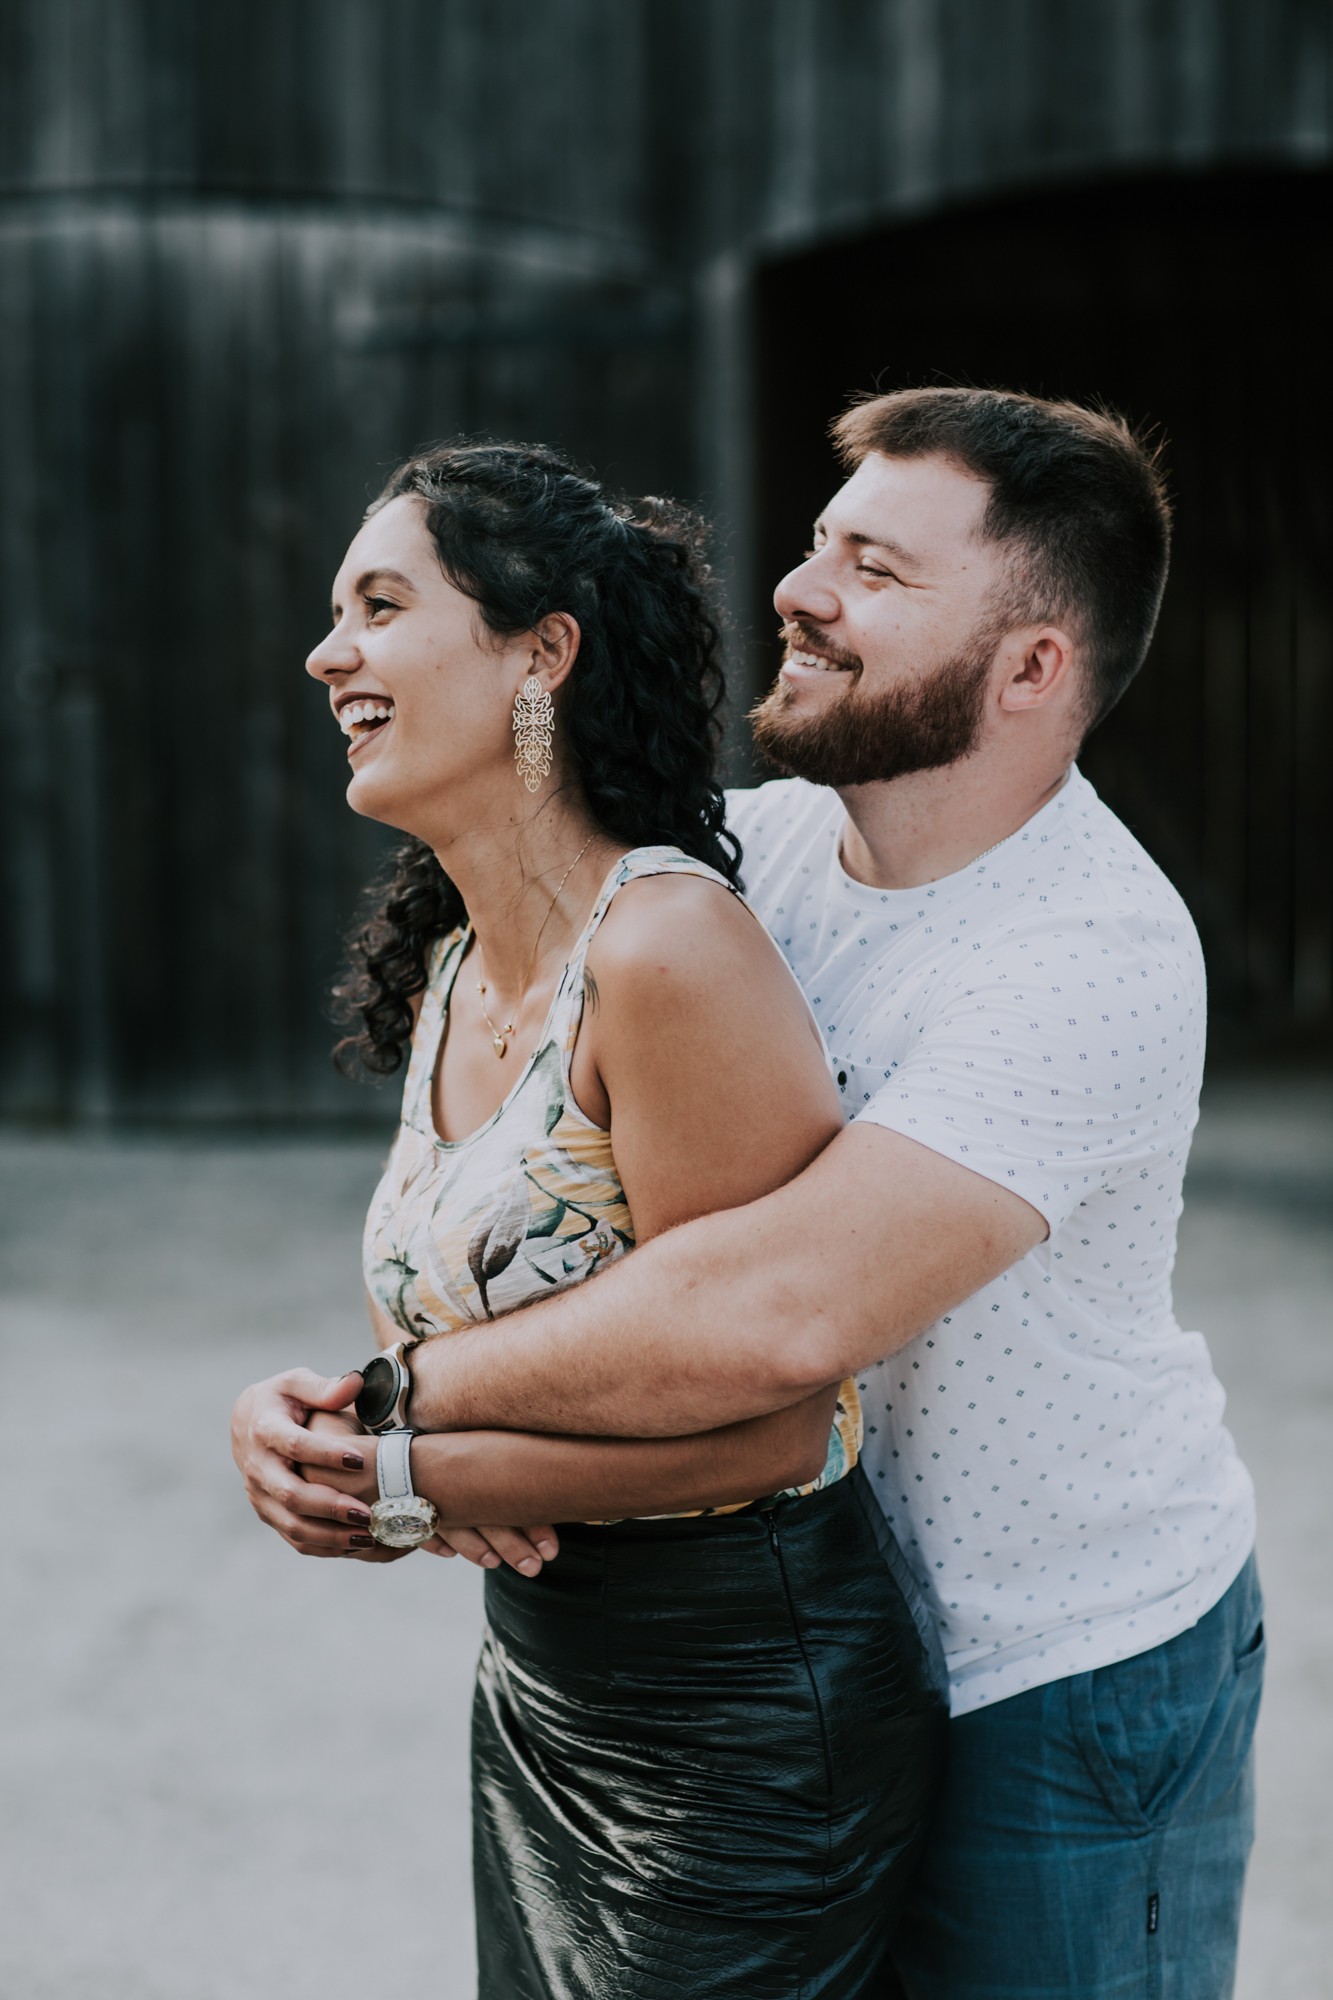 man embraces woman from behind while smiling